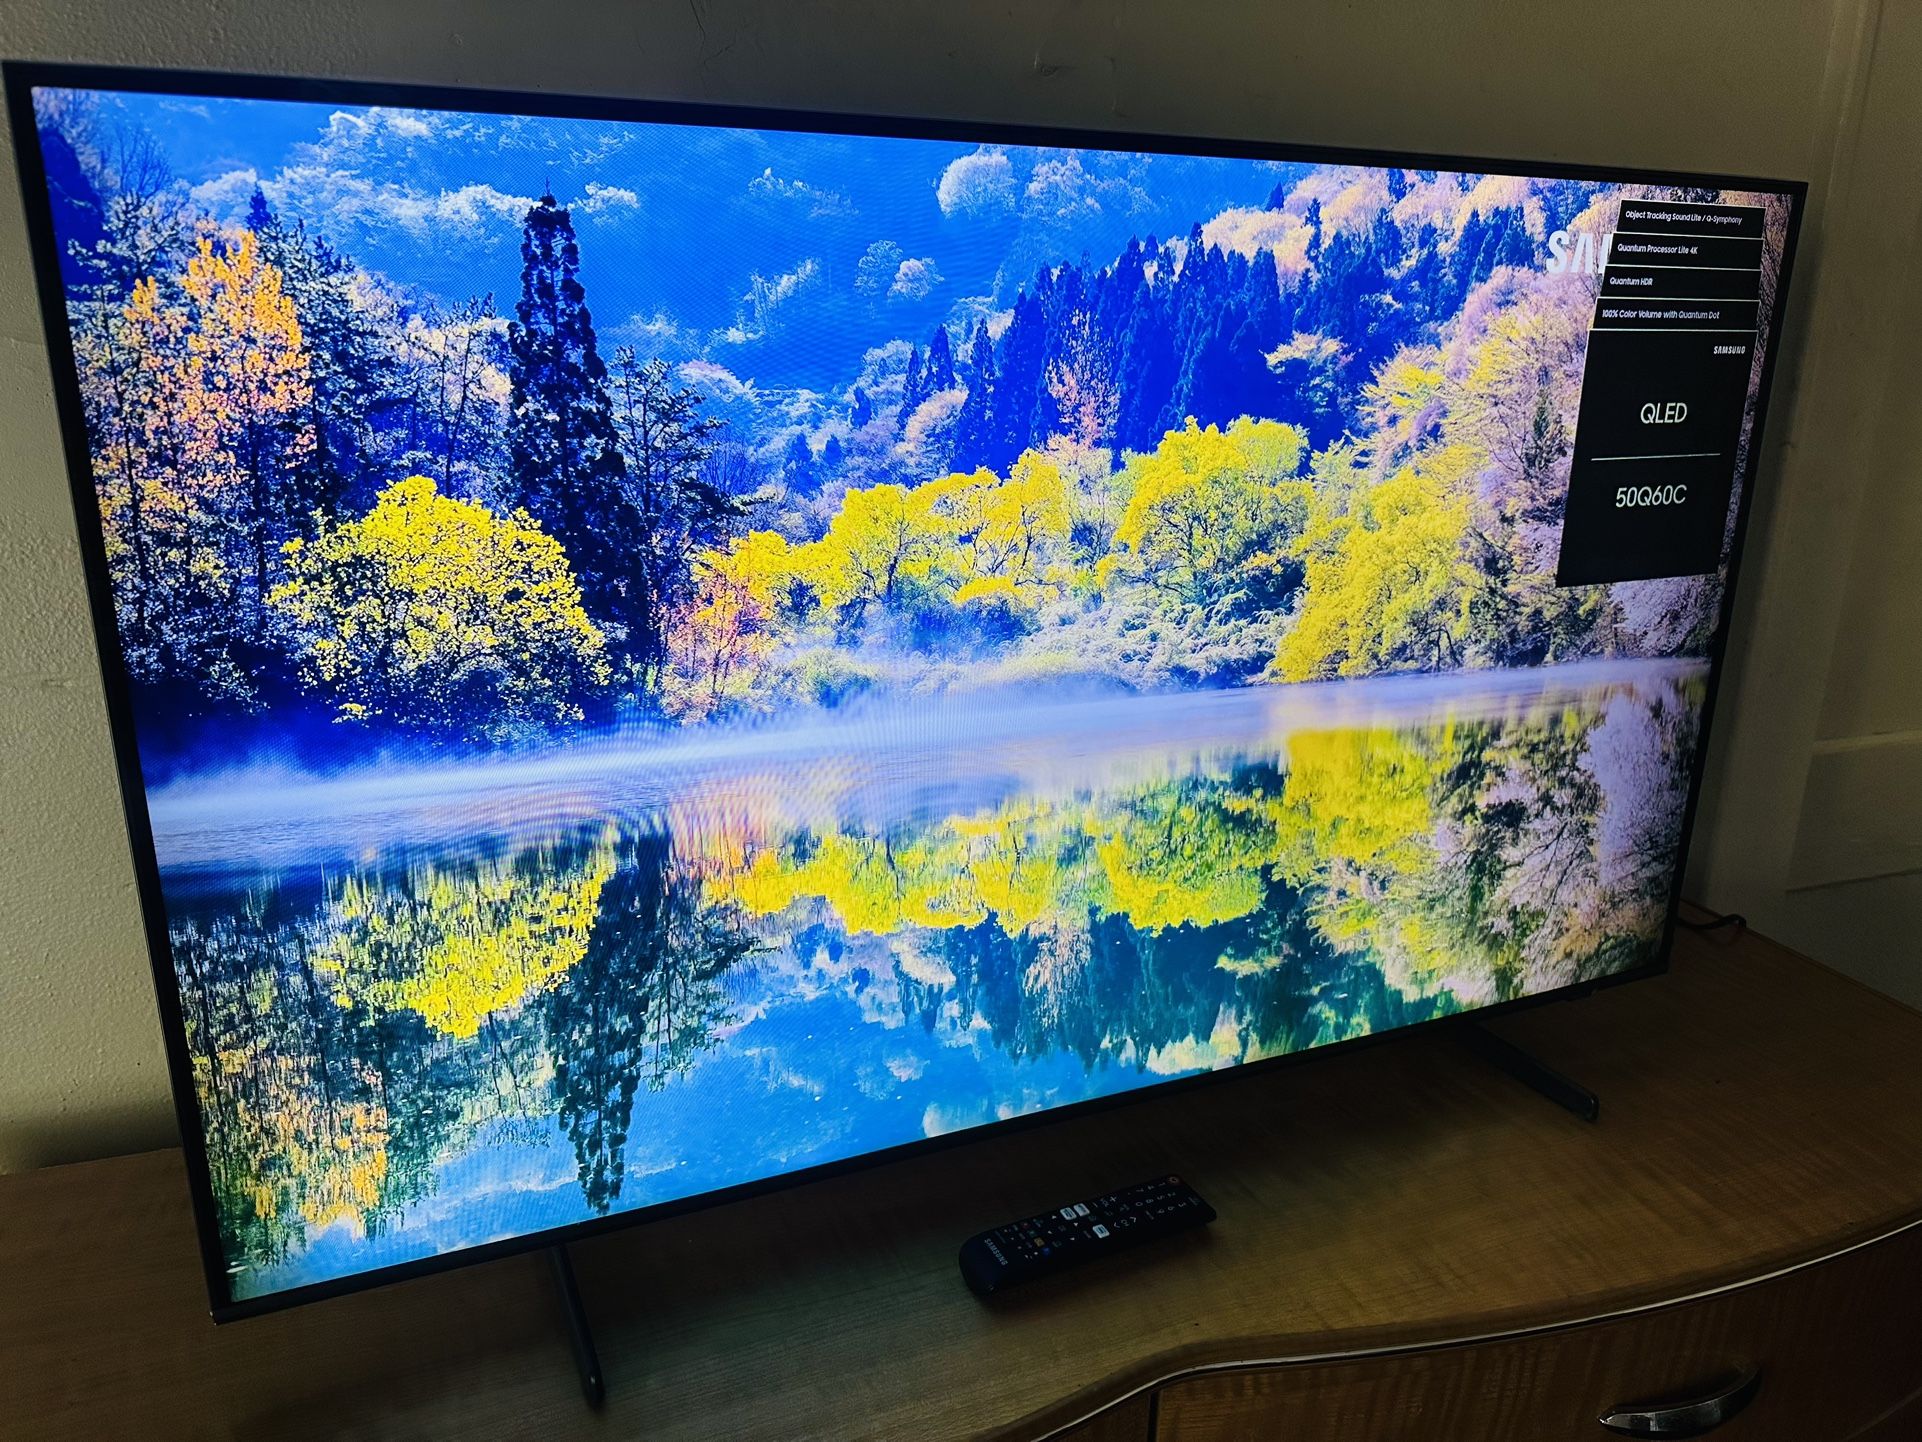 New! 50 Inch Samsung 4K QLED Smart TV!! (Price Firm!) (Also have Other TVs Available!)